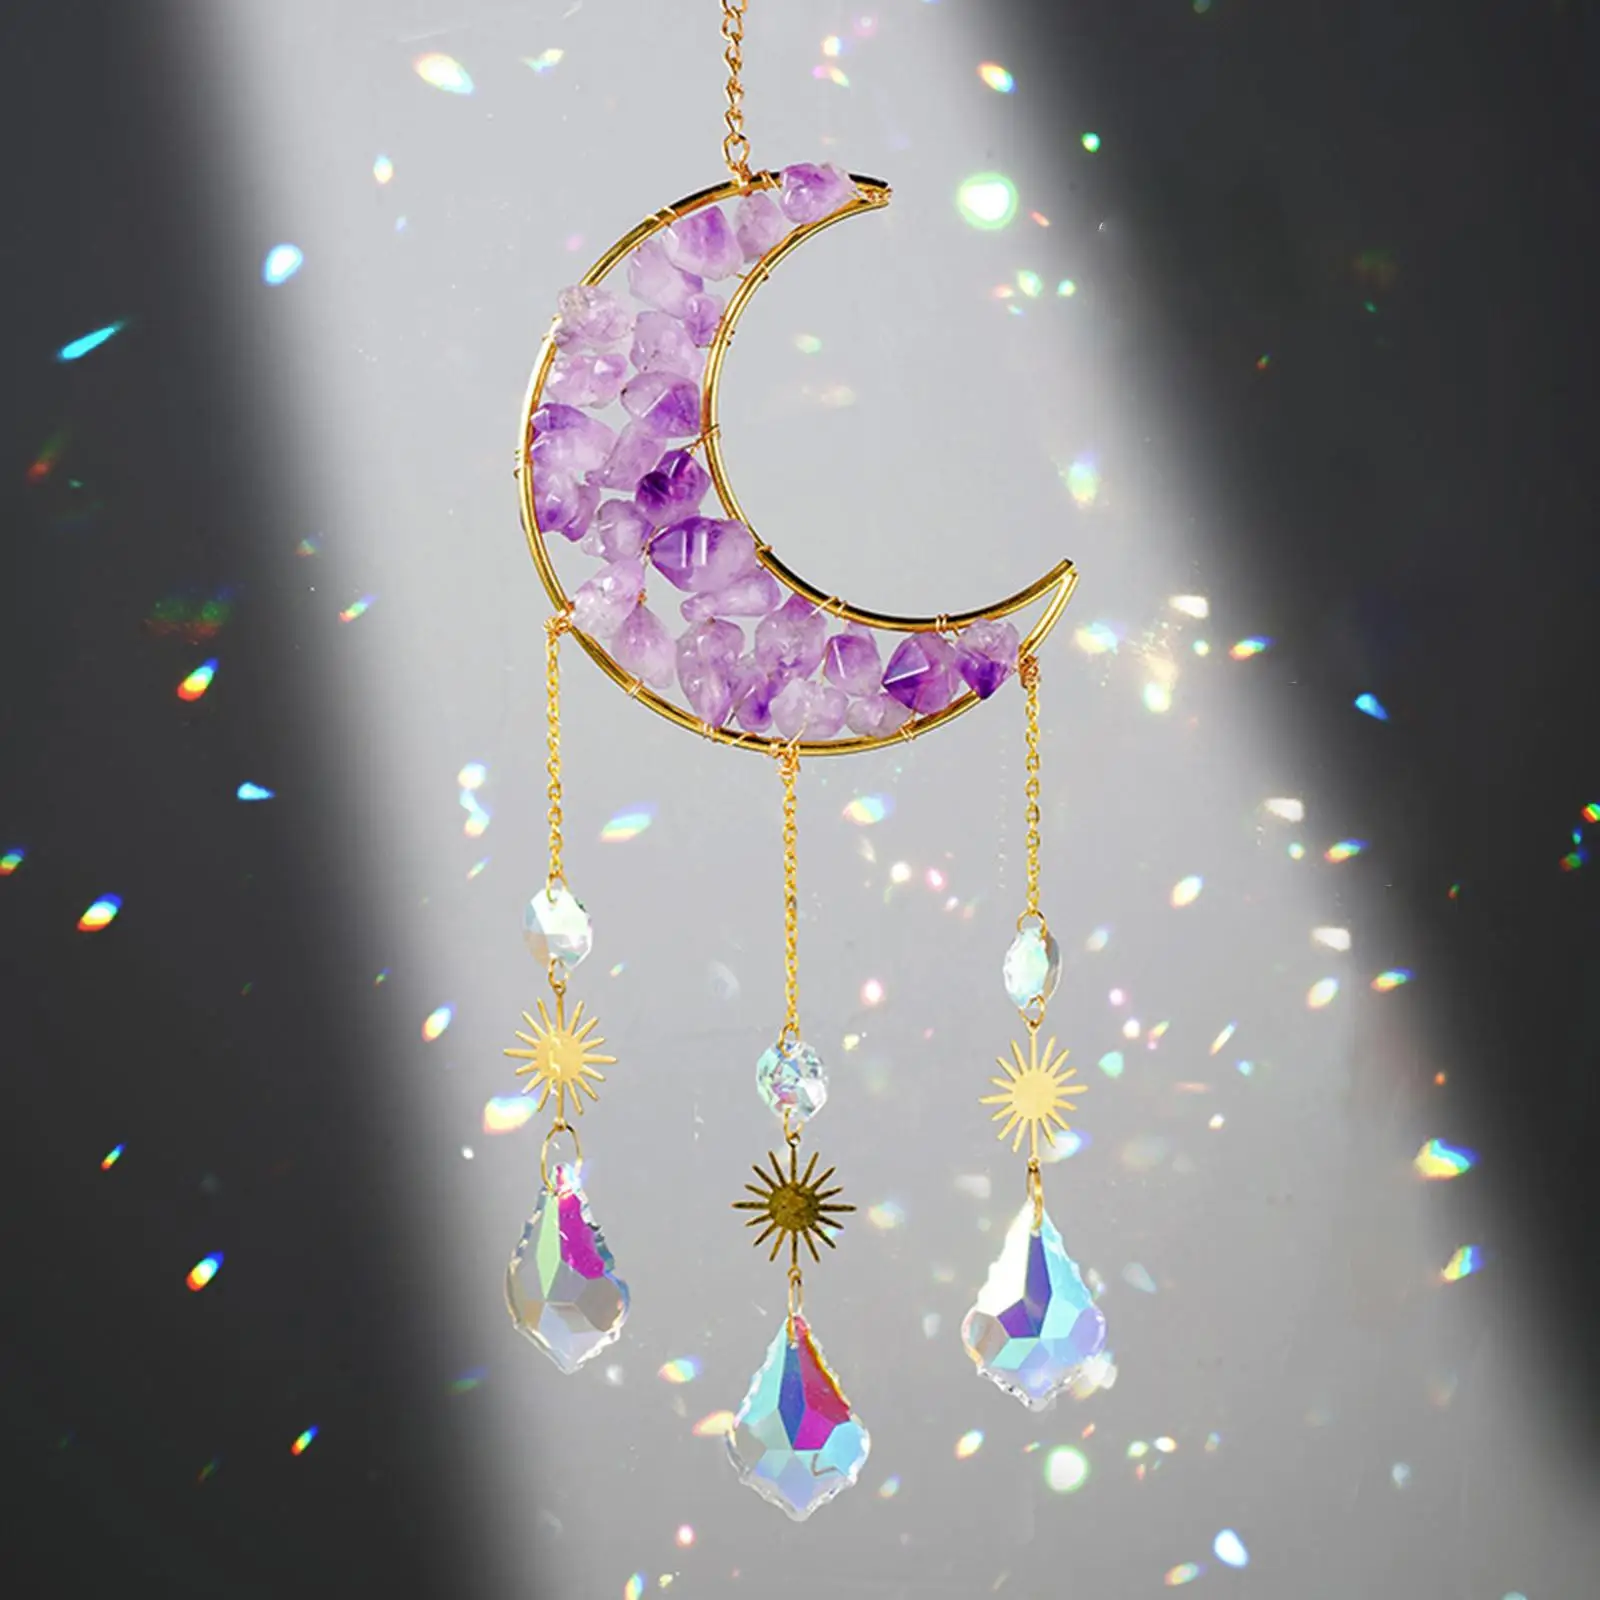 Crystal Wind Chime Moon Pendant Rainbow Maker Hanging Ornament Feng Shui for Home Window Office Decoration Gift